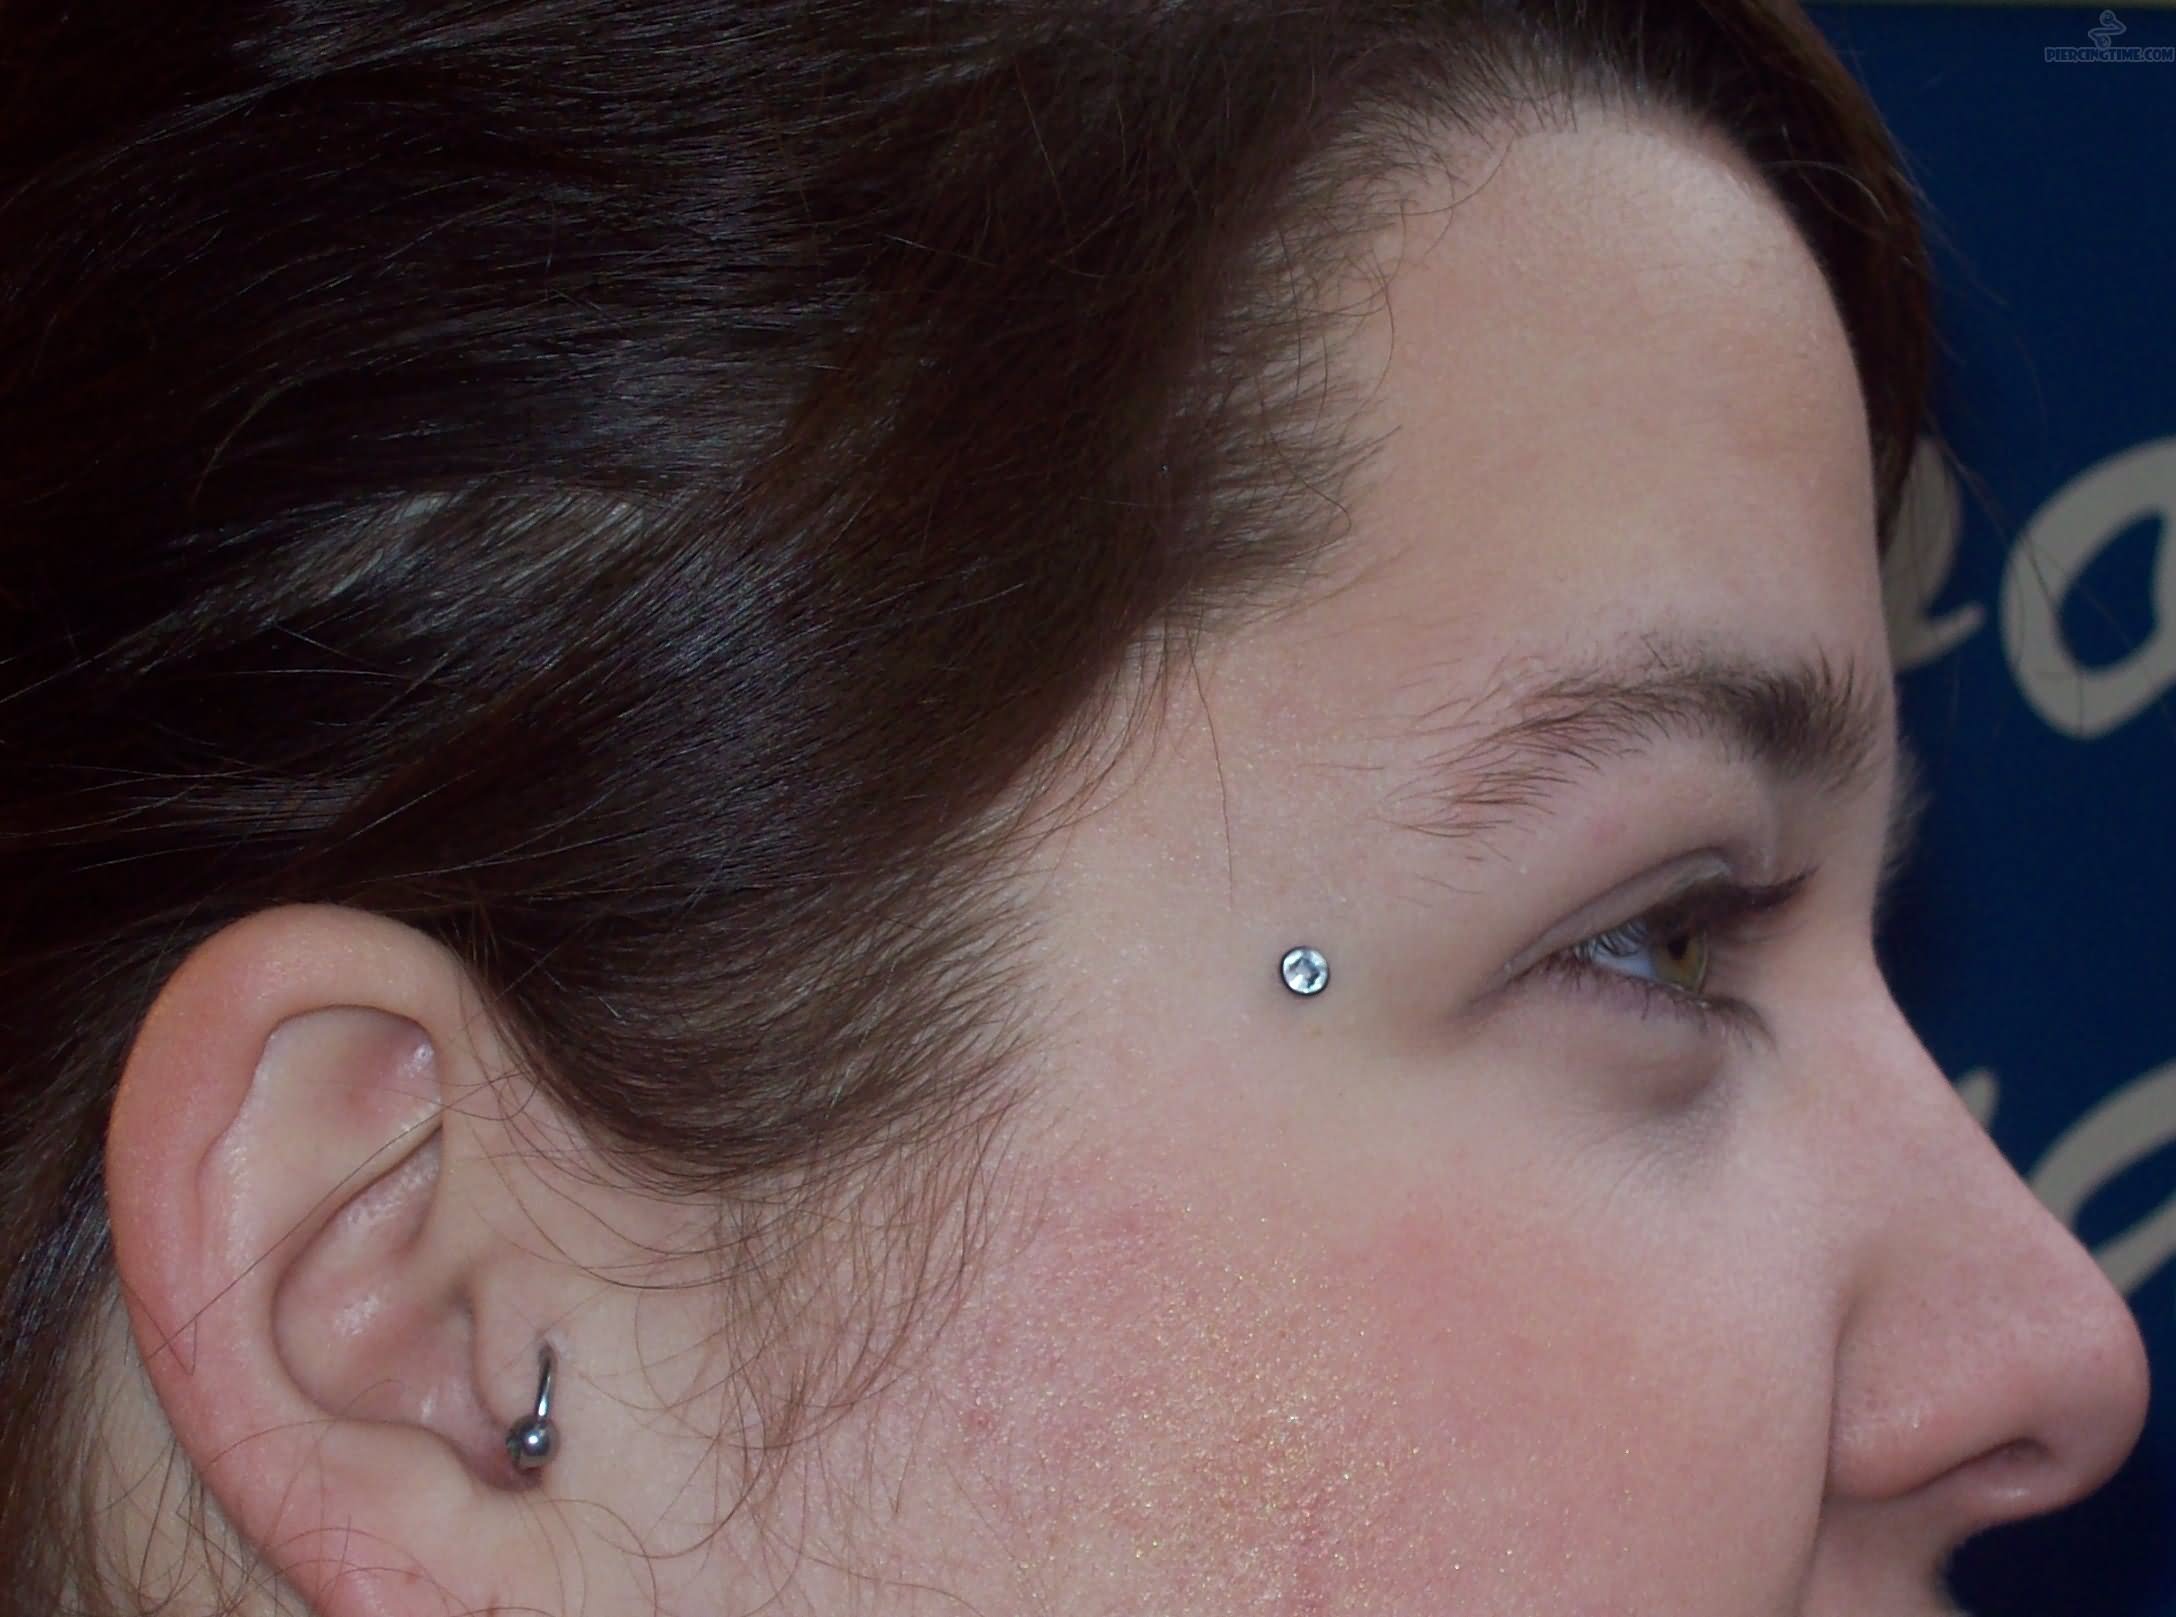 Dermal piercing Pictures Removal Infected Pain Micro Dermal Face Piercing. 